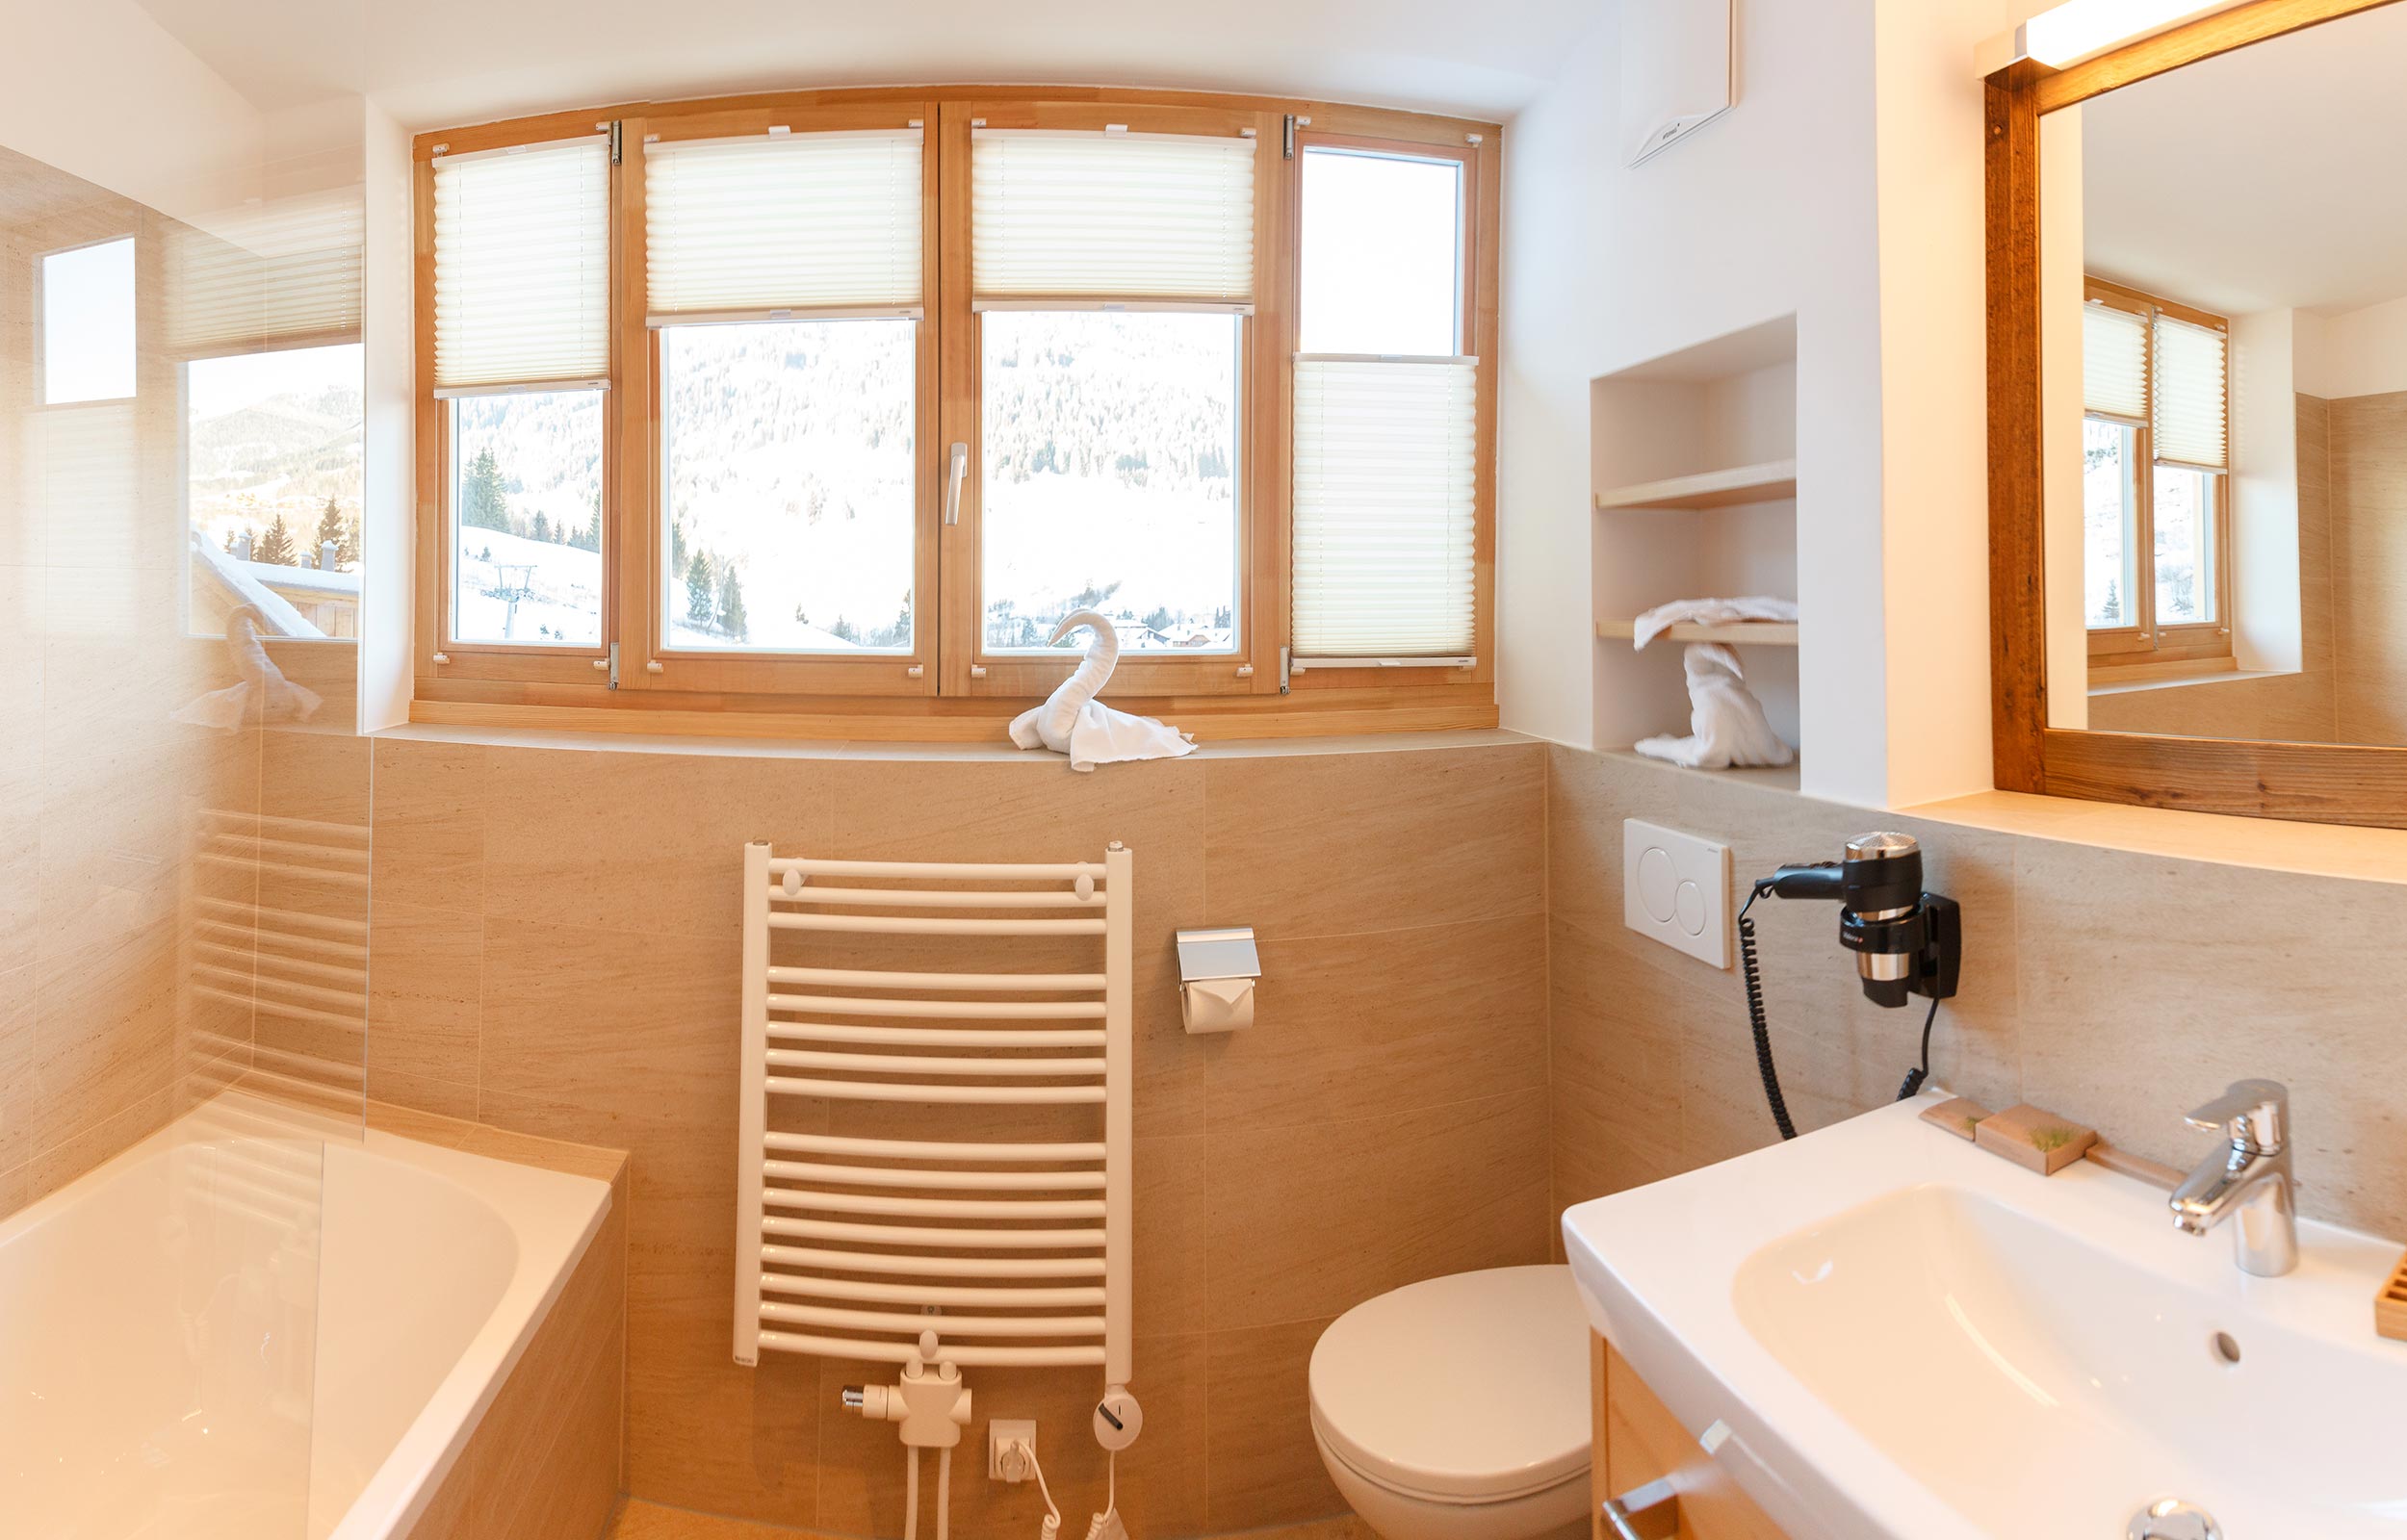 A fully equipped bathroom in the chalet with a bathtub, toilet and a sink